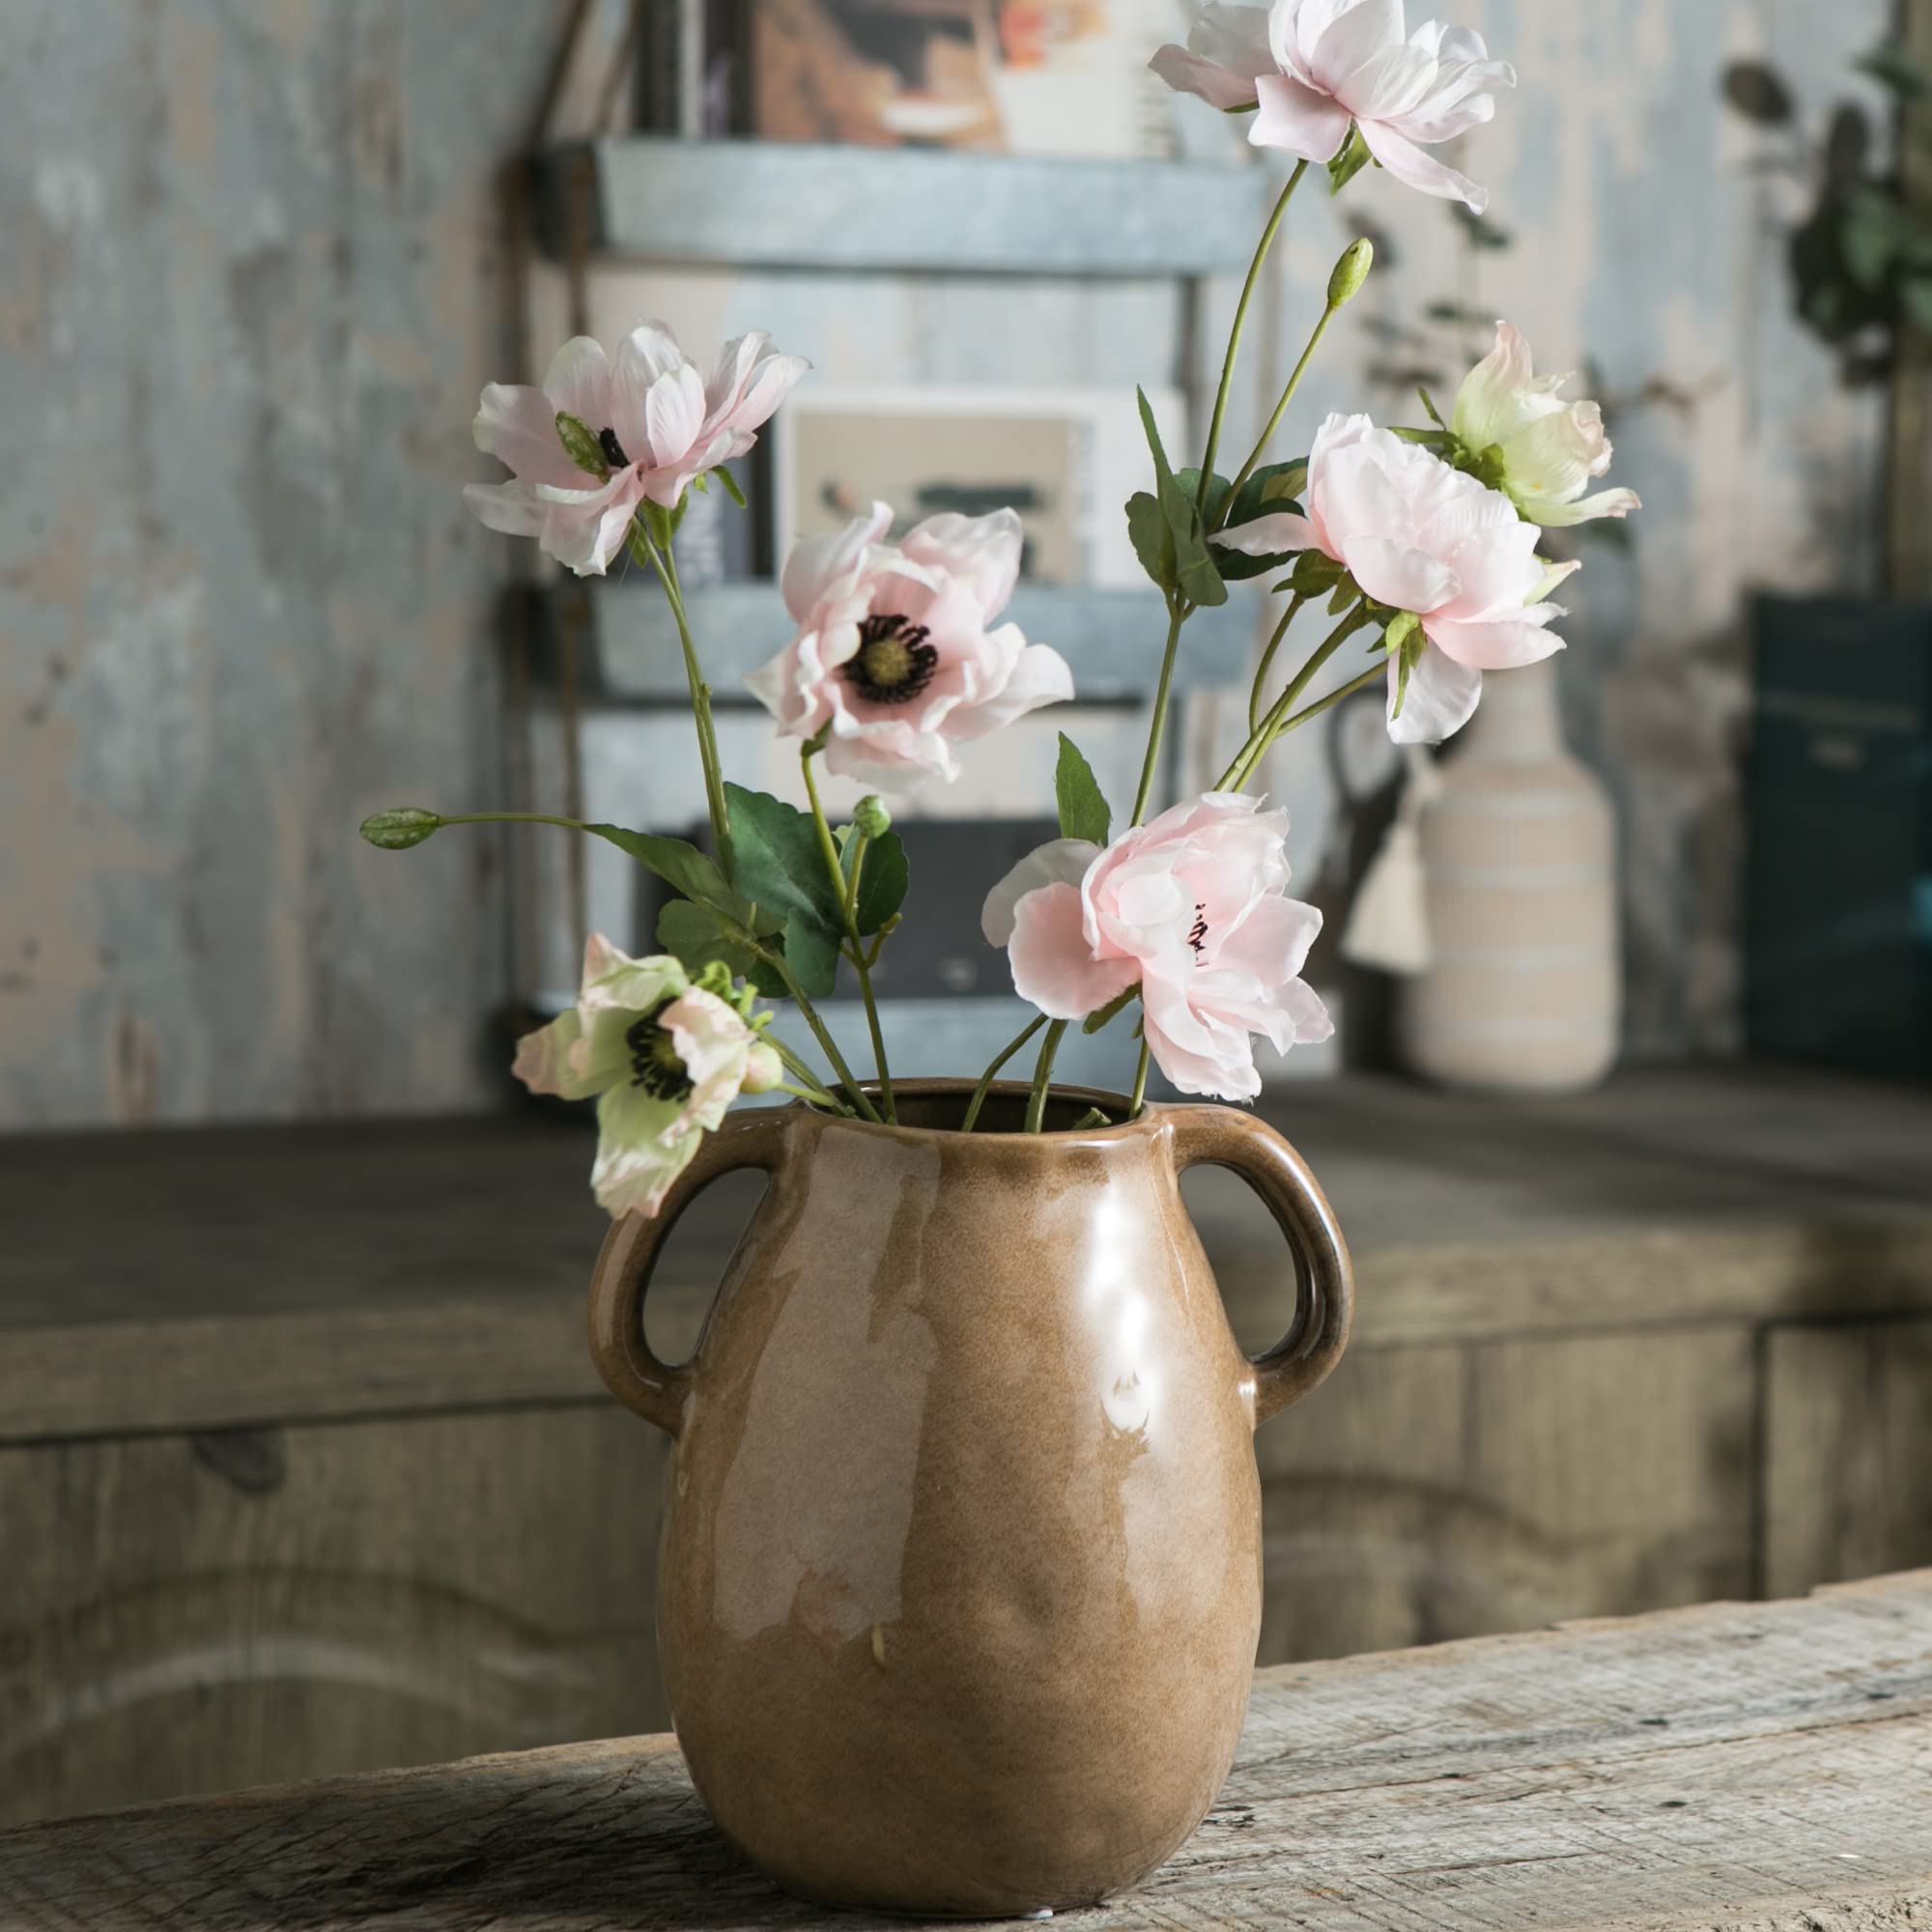 Tanvecle Brown Ceramic Vase with 2 Handles, Modern Farmhouse Vase for Home Decor, Rustic Terracotta Vase, Decorative Pottery Flower Vase, Clay Small Vase, Centerpieces for Dining Table - 7 Inch Tall